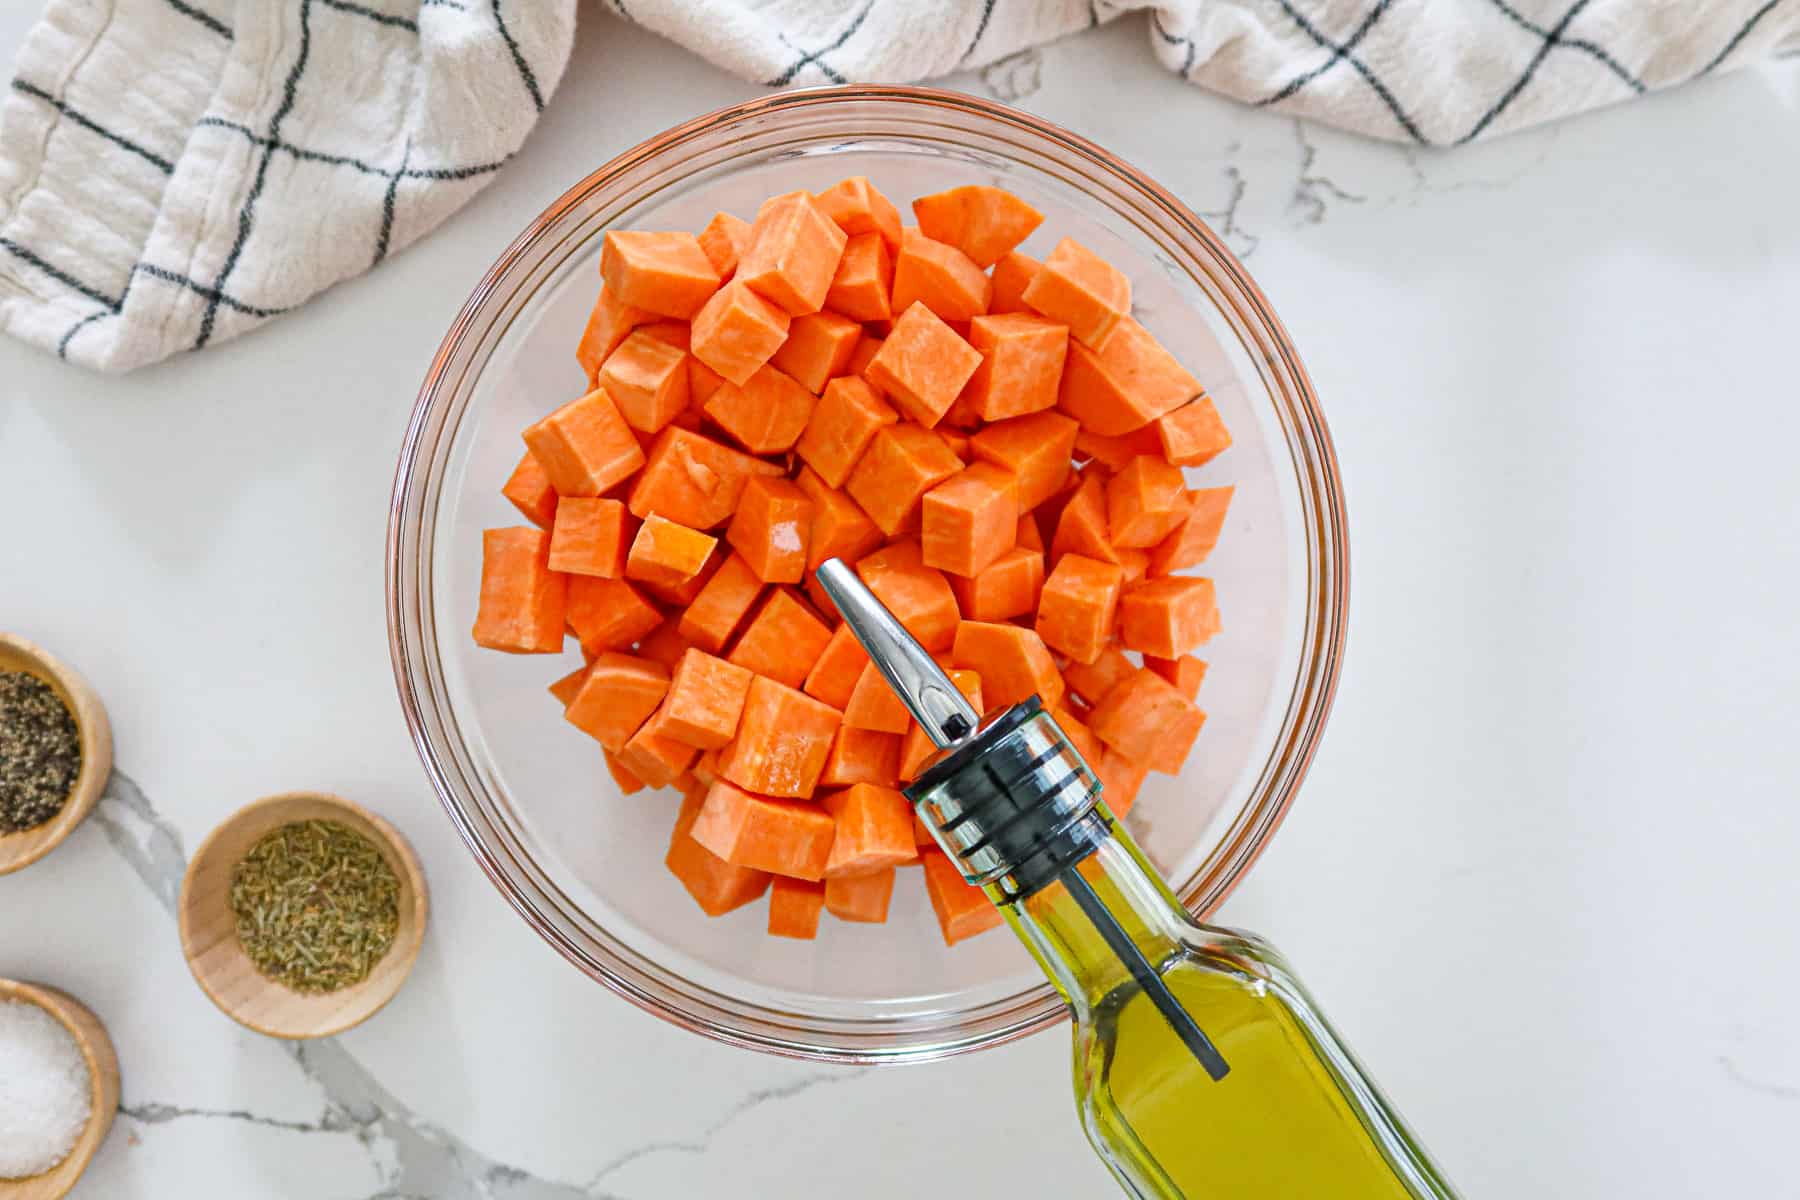 Drizzling olive oil on sweet potato cubes in a glass bowl.